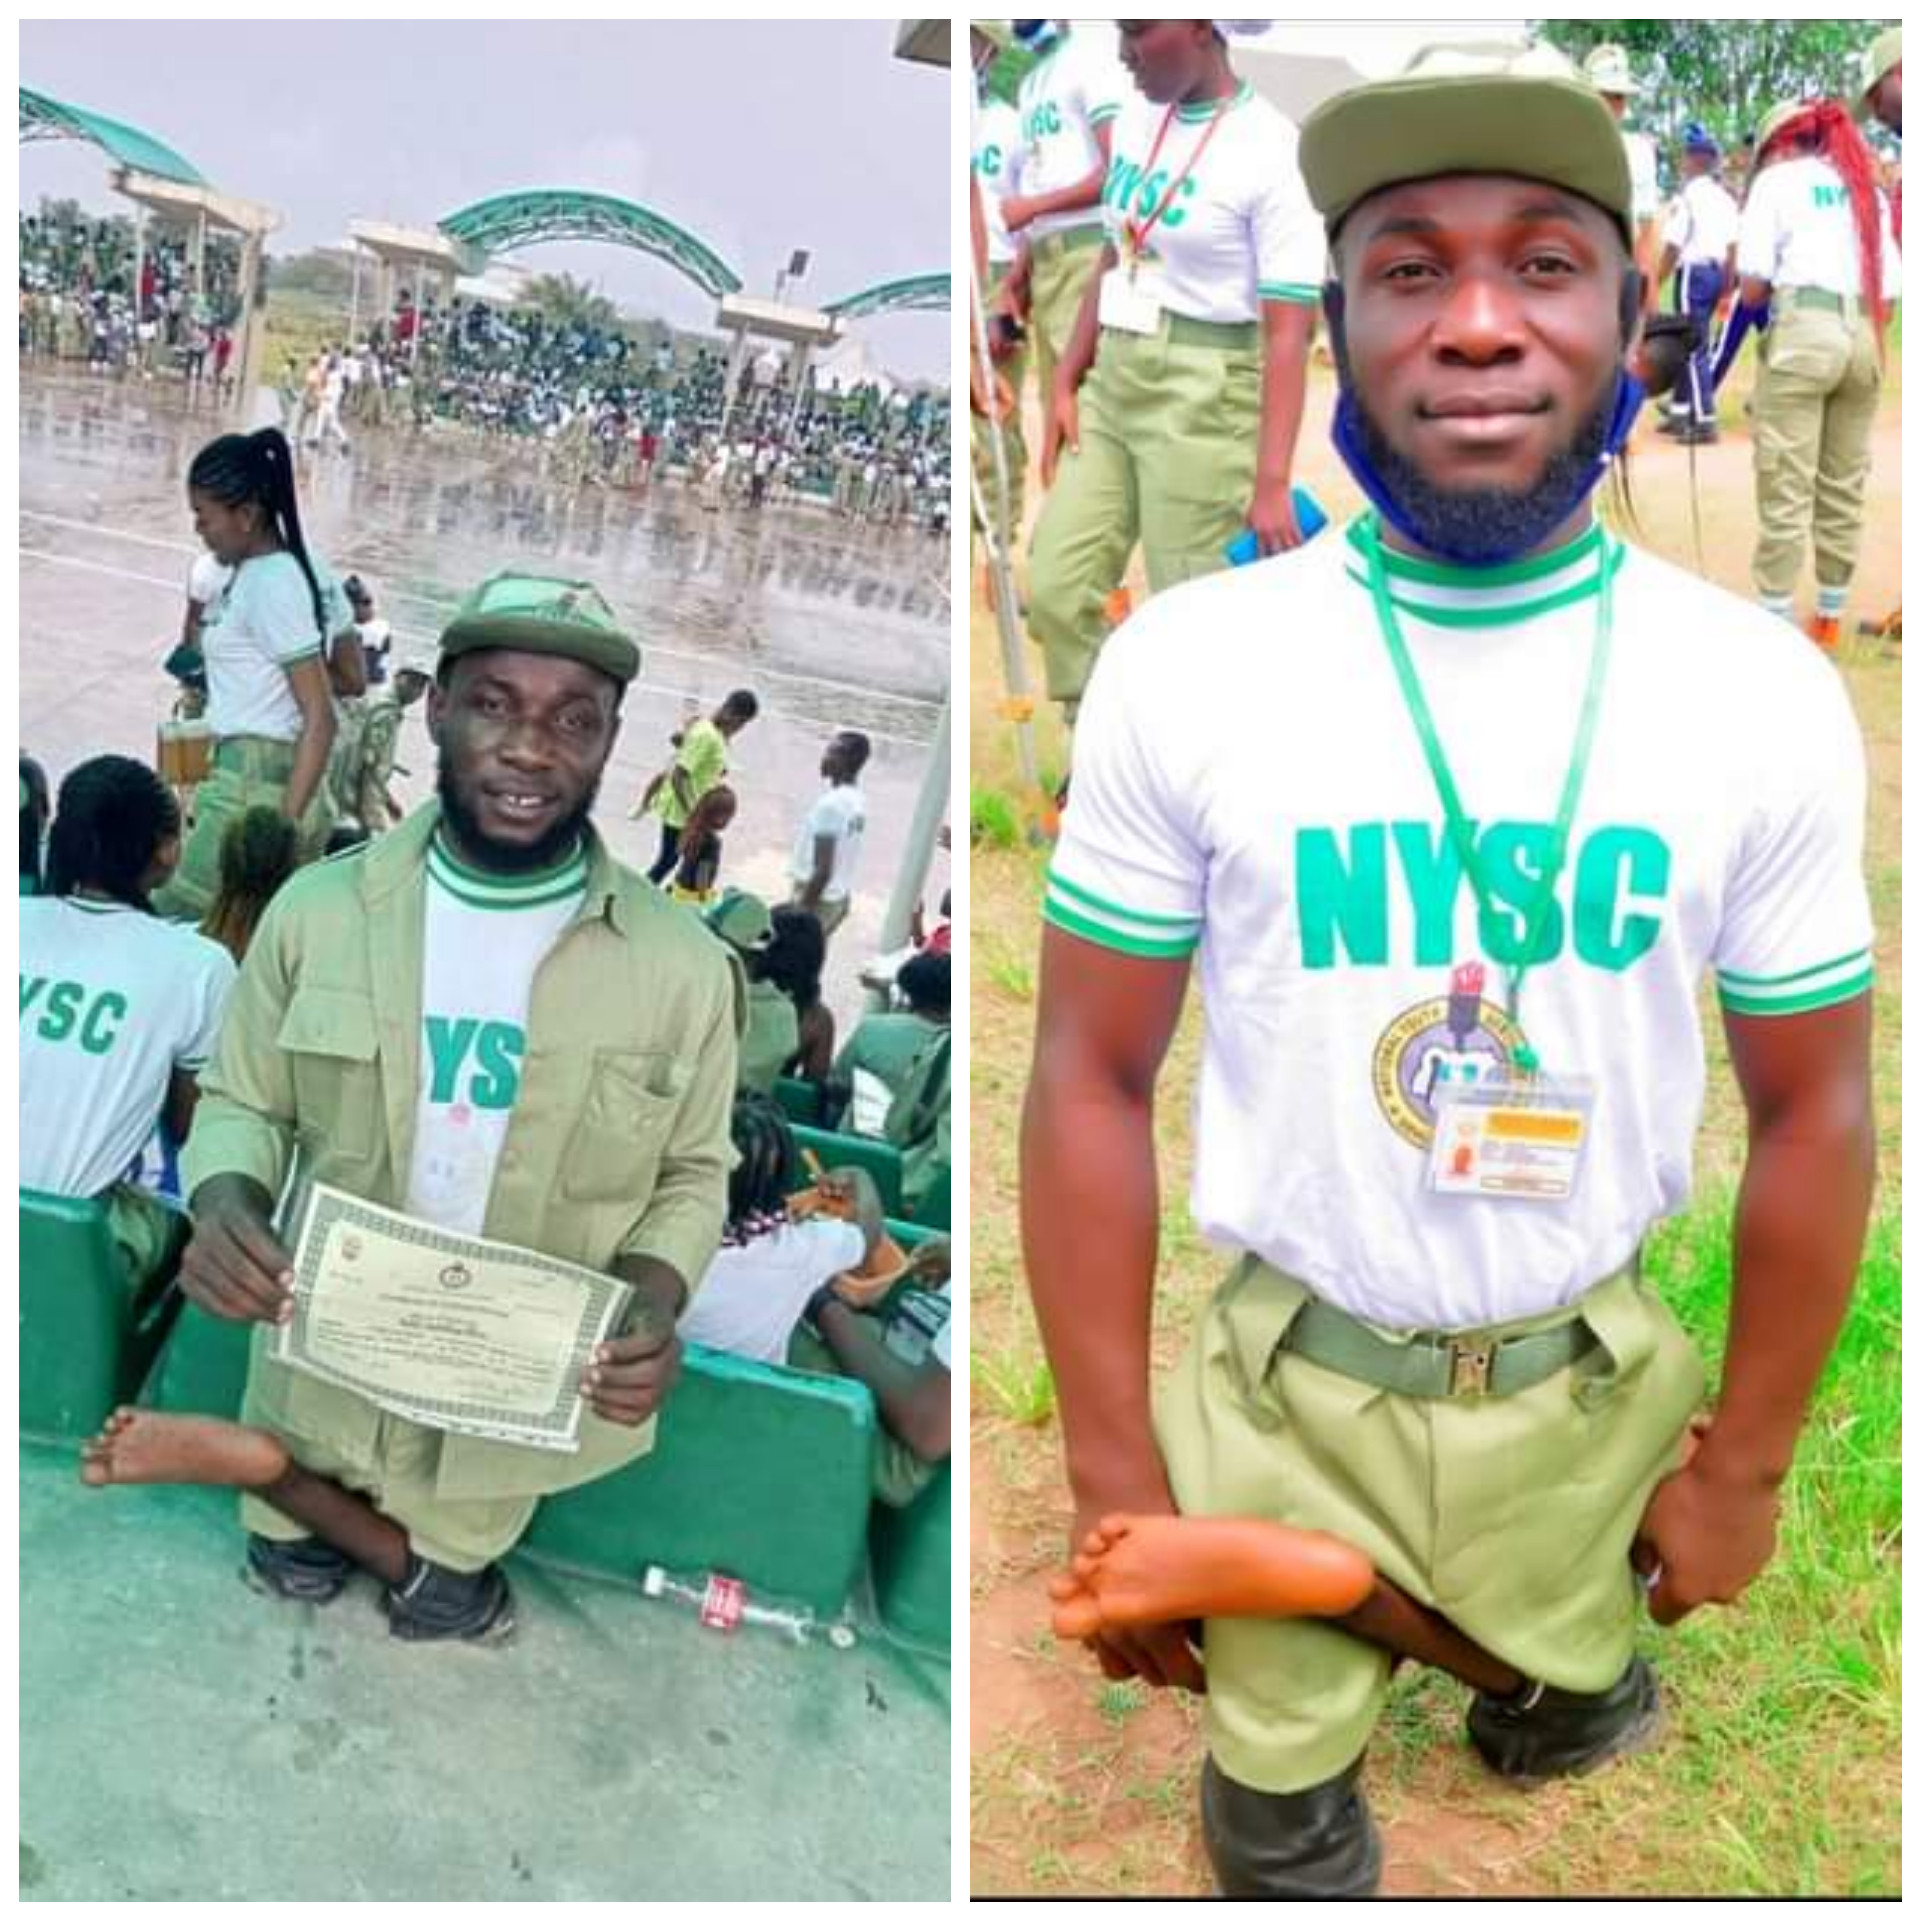 “You don’t have to make excuses for failure” – Physically challenged young man says as he celebrates passing out of NYSC